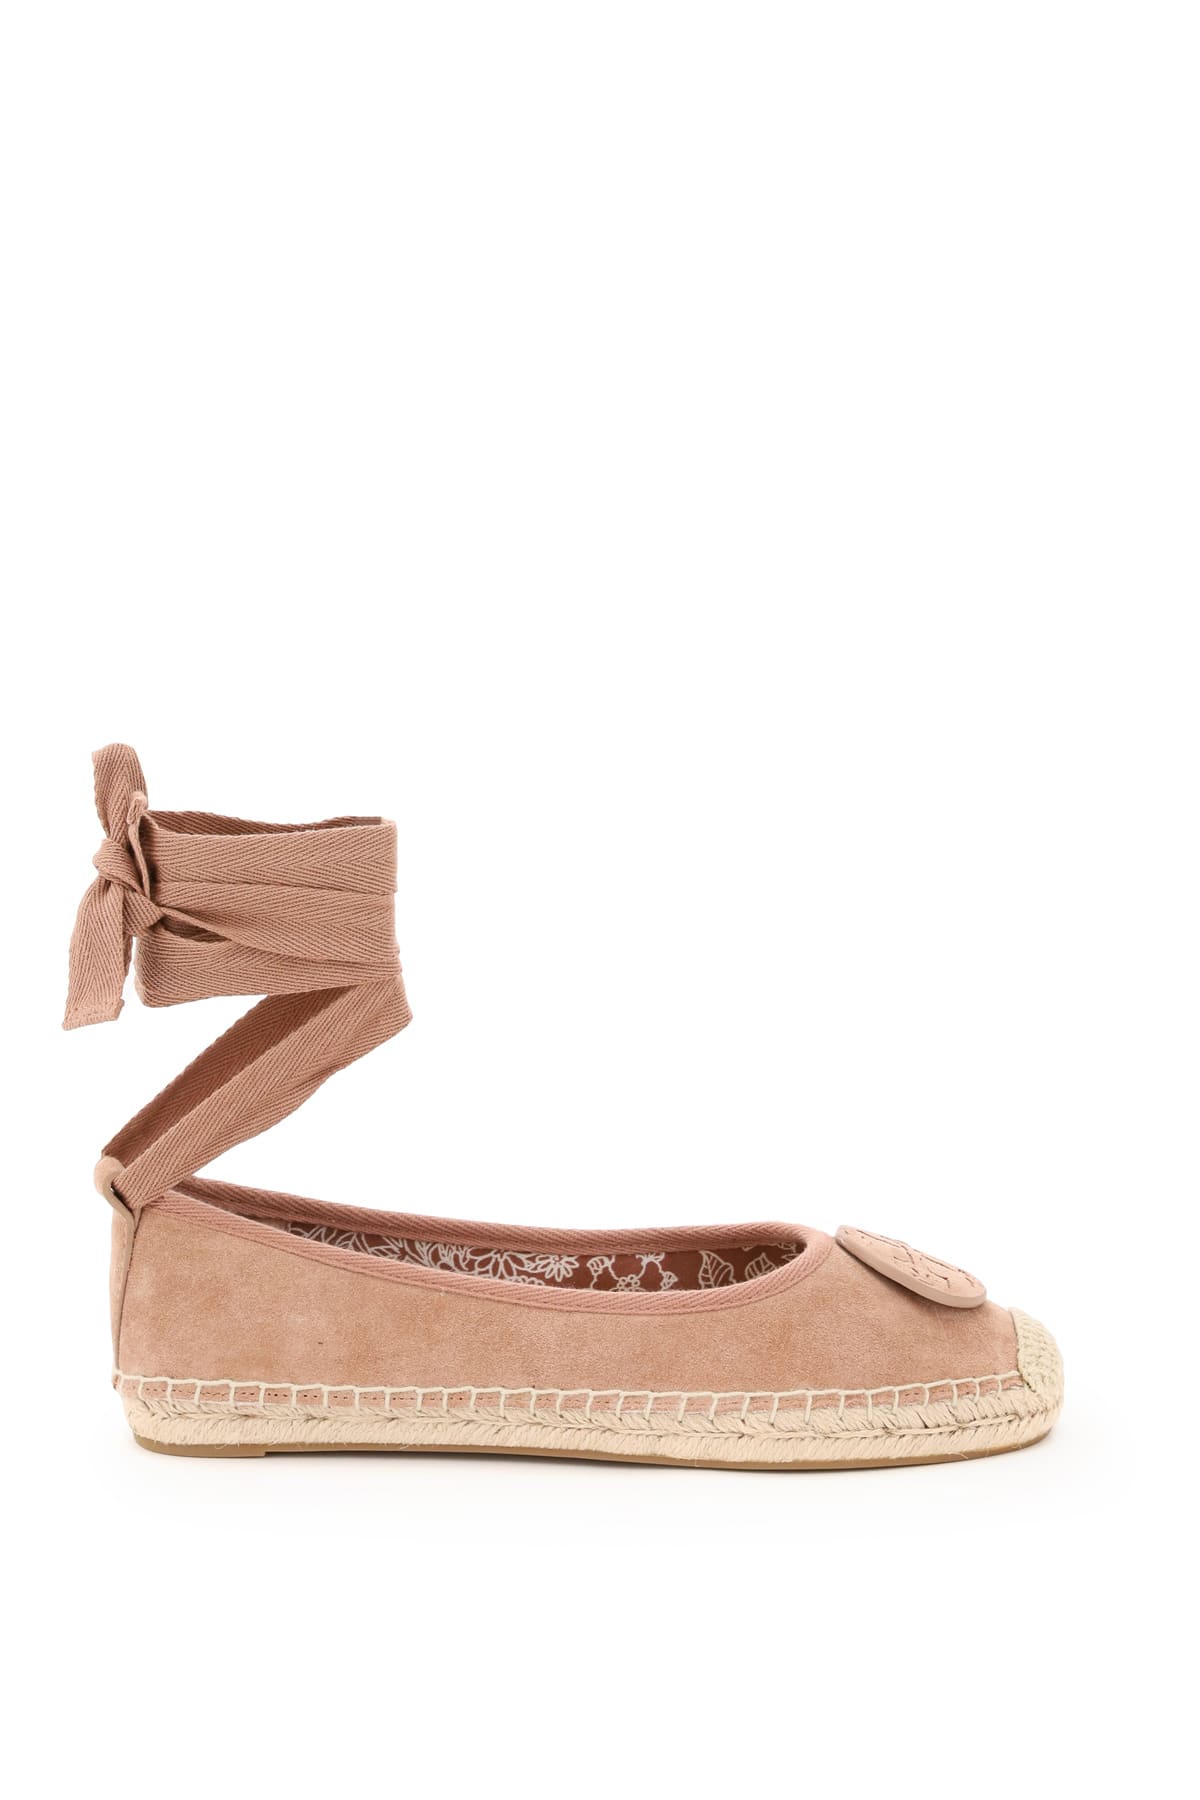 Buy Tory Burch Minnie Ballet Espadrilles online, shop Tory Burch shoes with free shipping